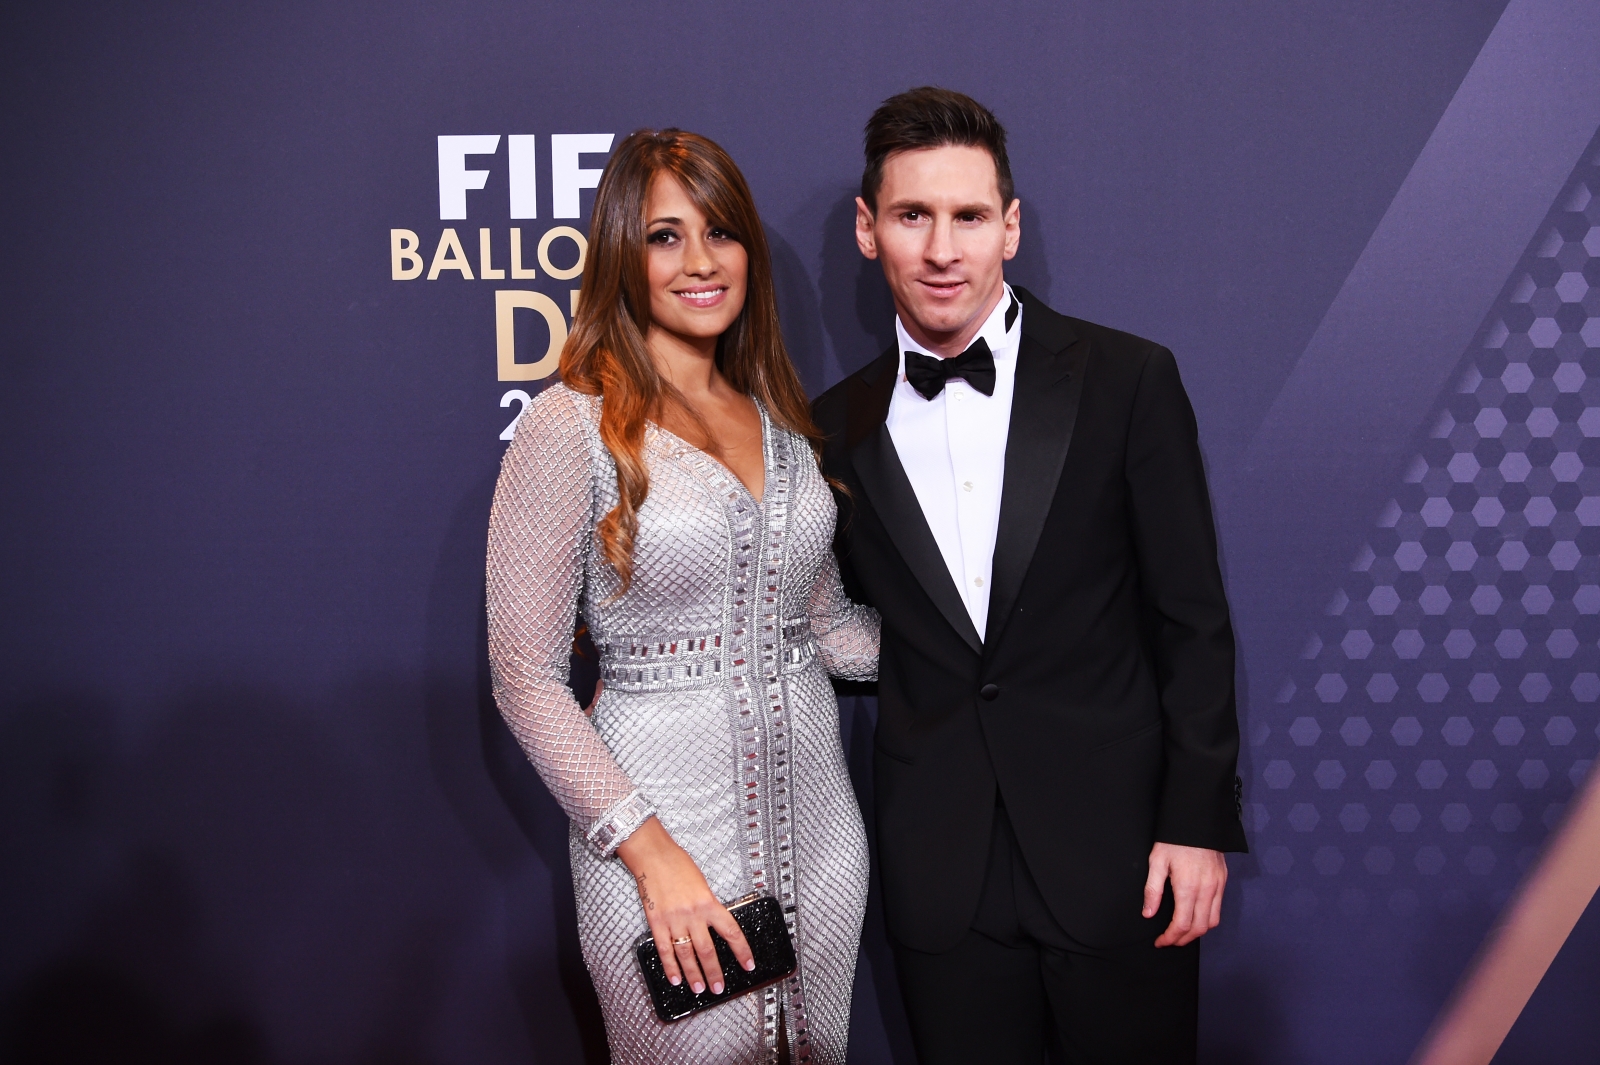 Lionel Messi holidays with girlfriend Antonella Roccuzzo in Spain amid